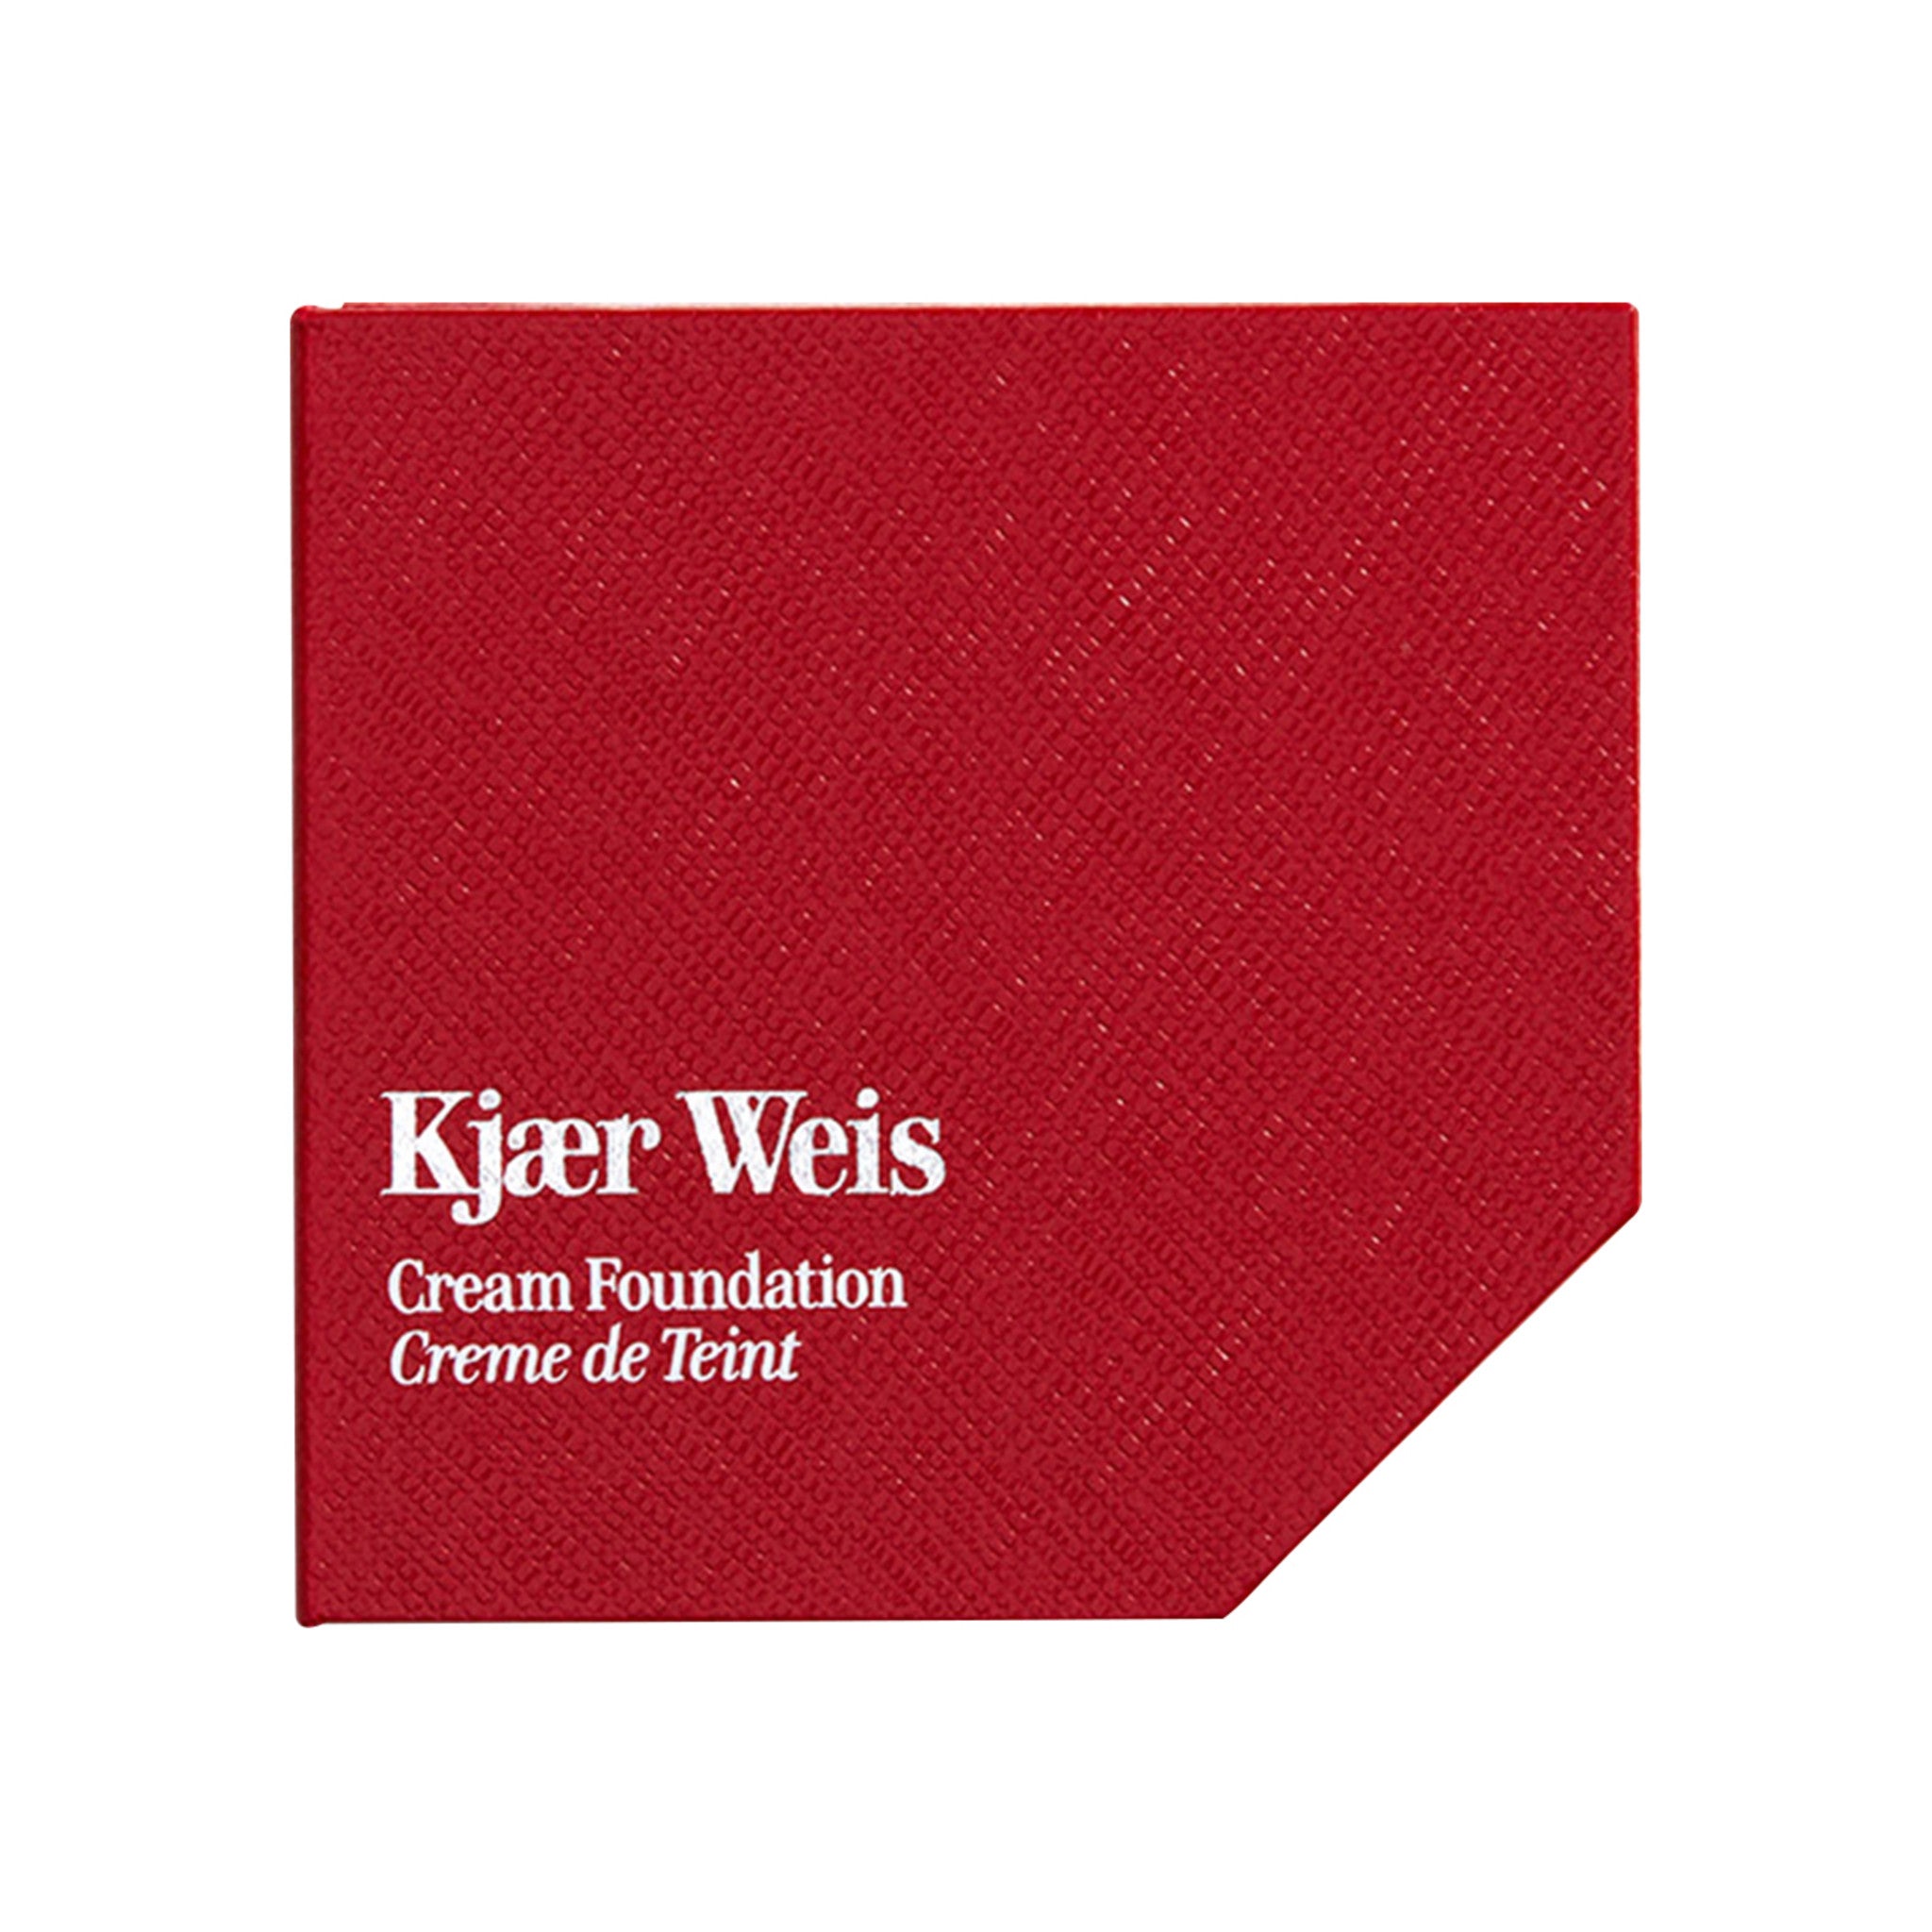 Kjaer Weis Red Edition Compact Cream Foundation Case main image.